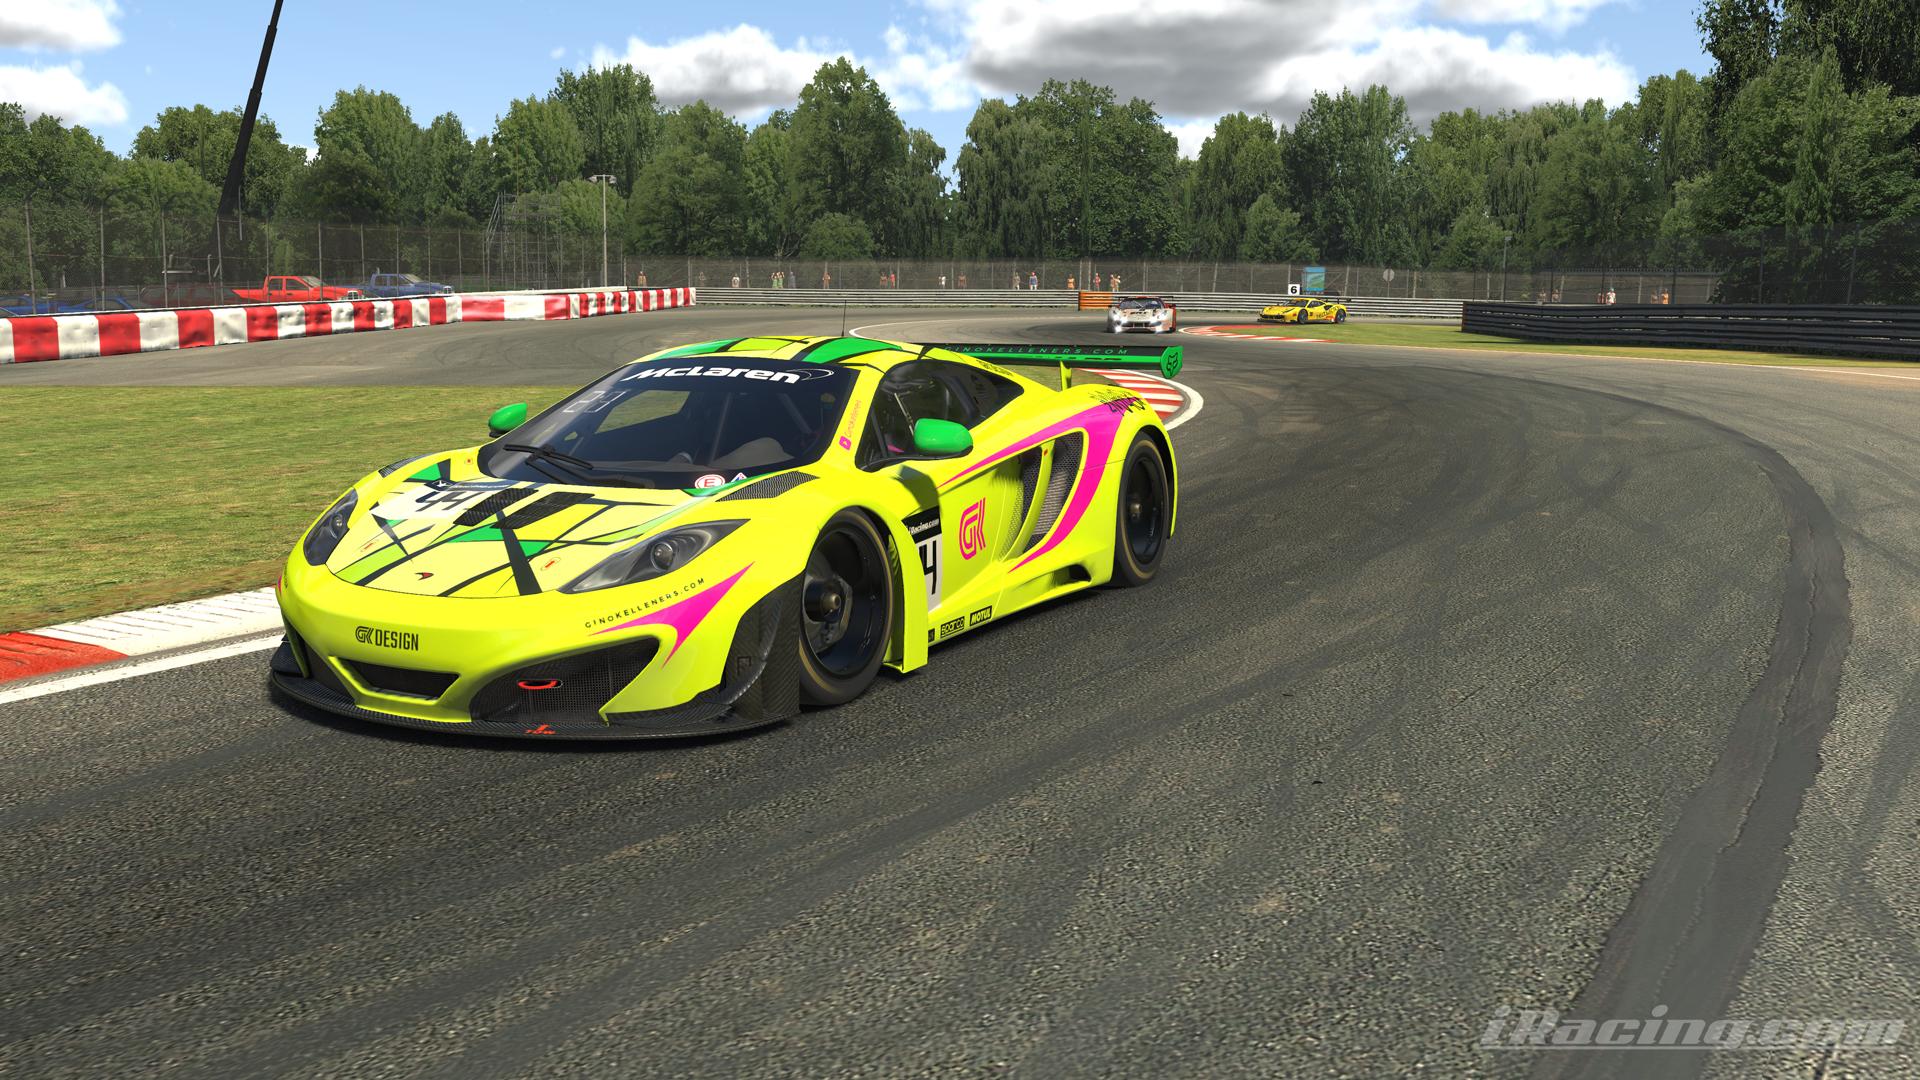 Preview of Ningaloo Reef Livery - McLaren MP4-12C GT3 by Gino Kelleners